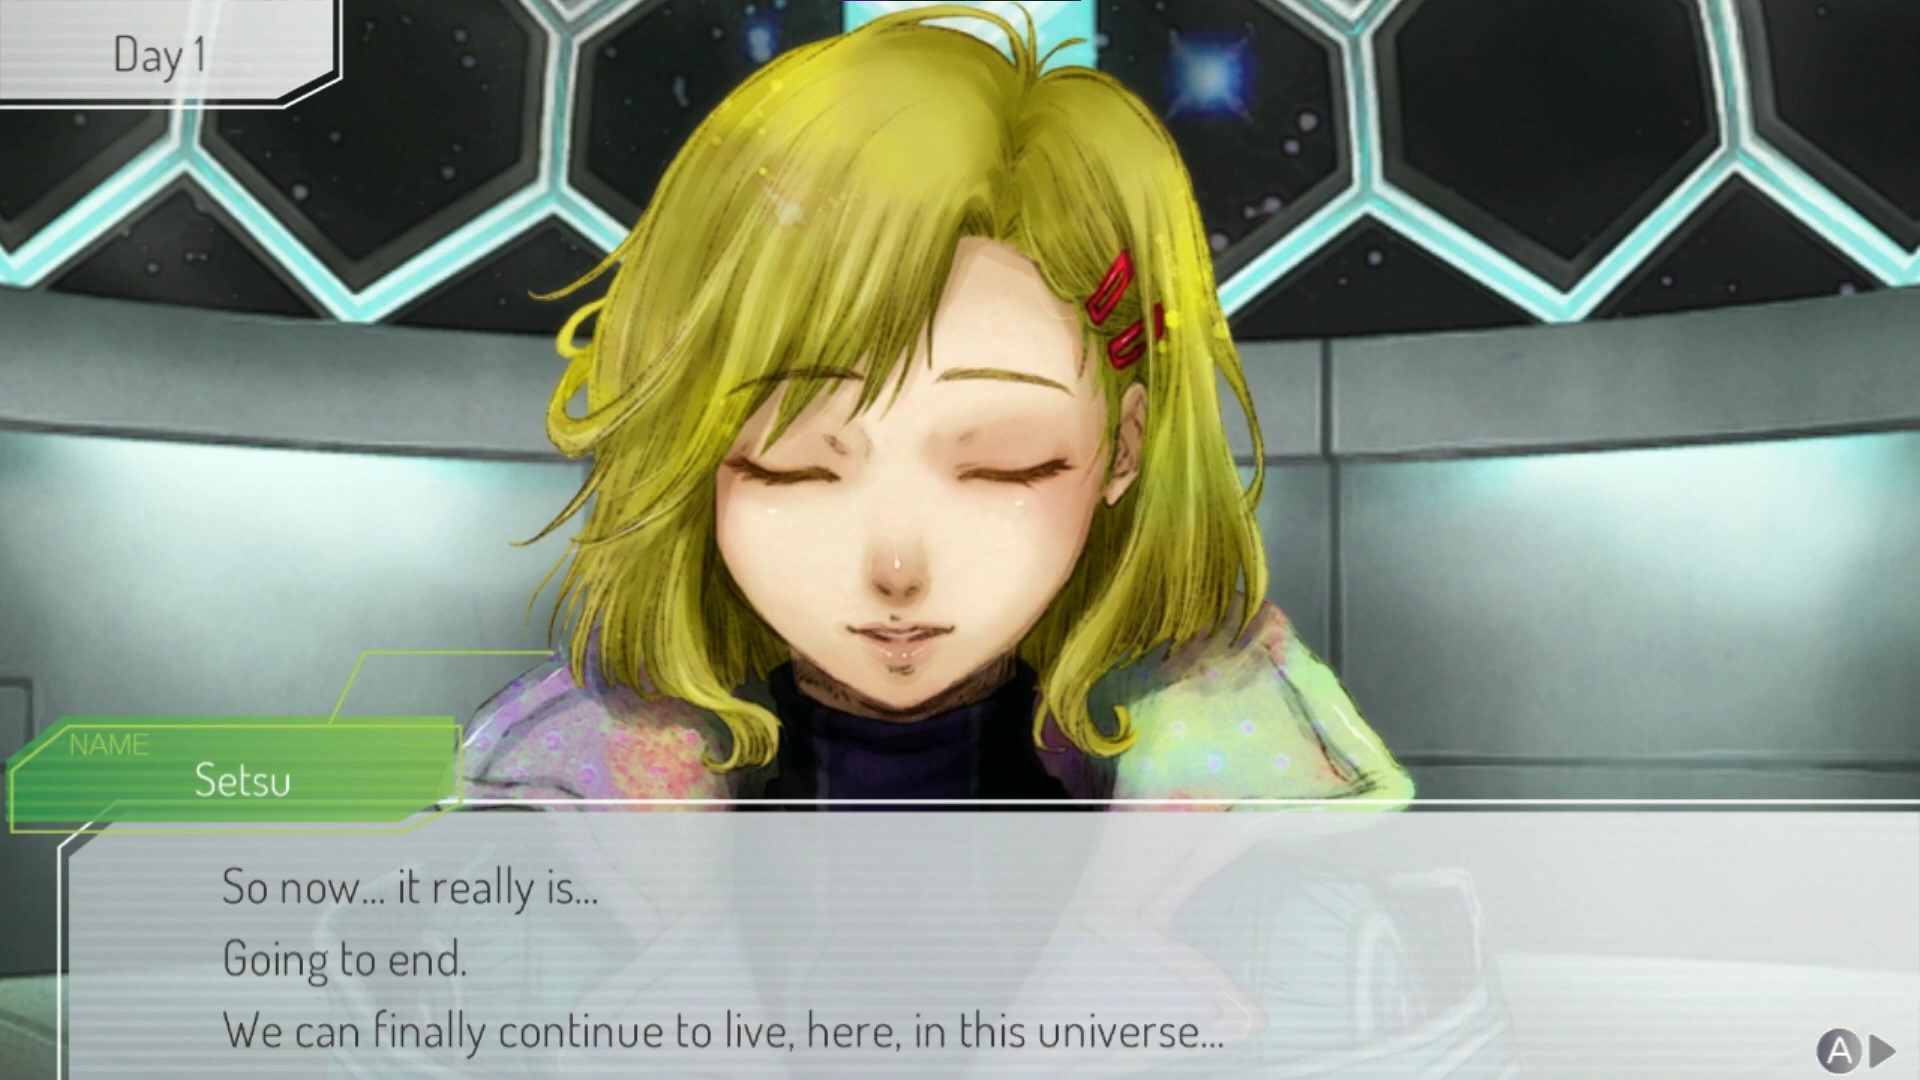 Gnosia screenshot of Setsu saying "so now...it really is...going to end. We can finally continue to live, in this universe"